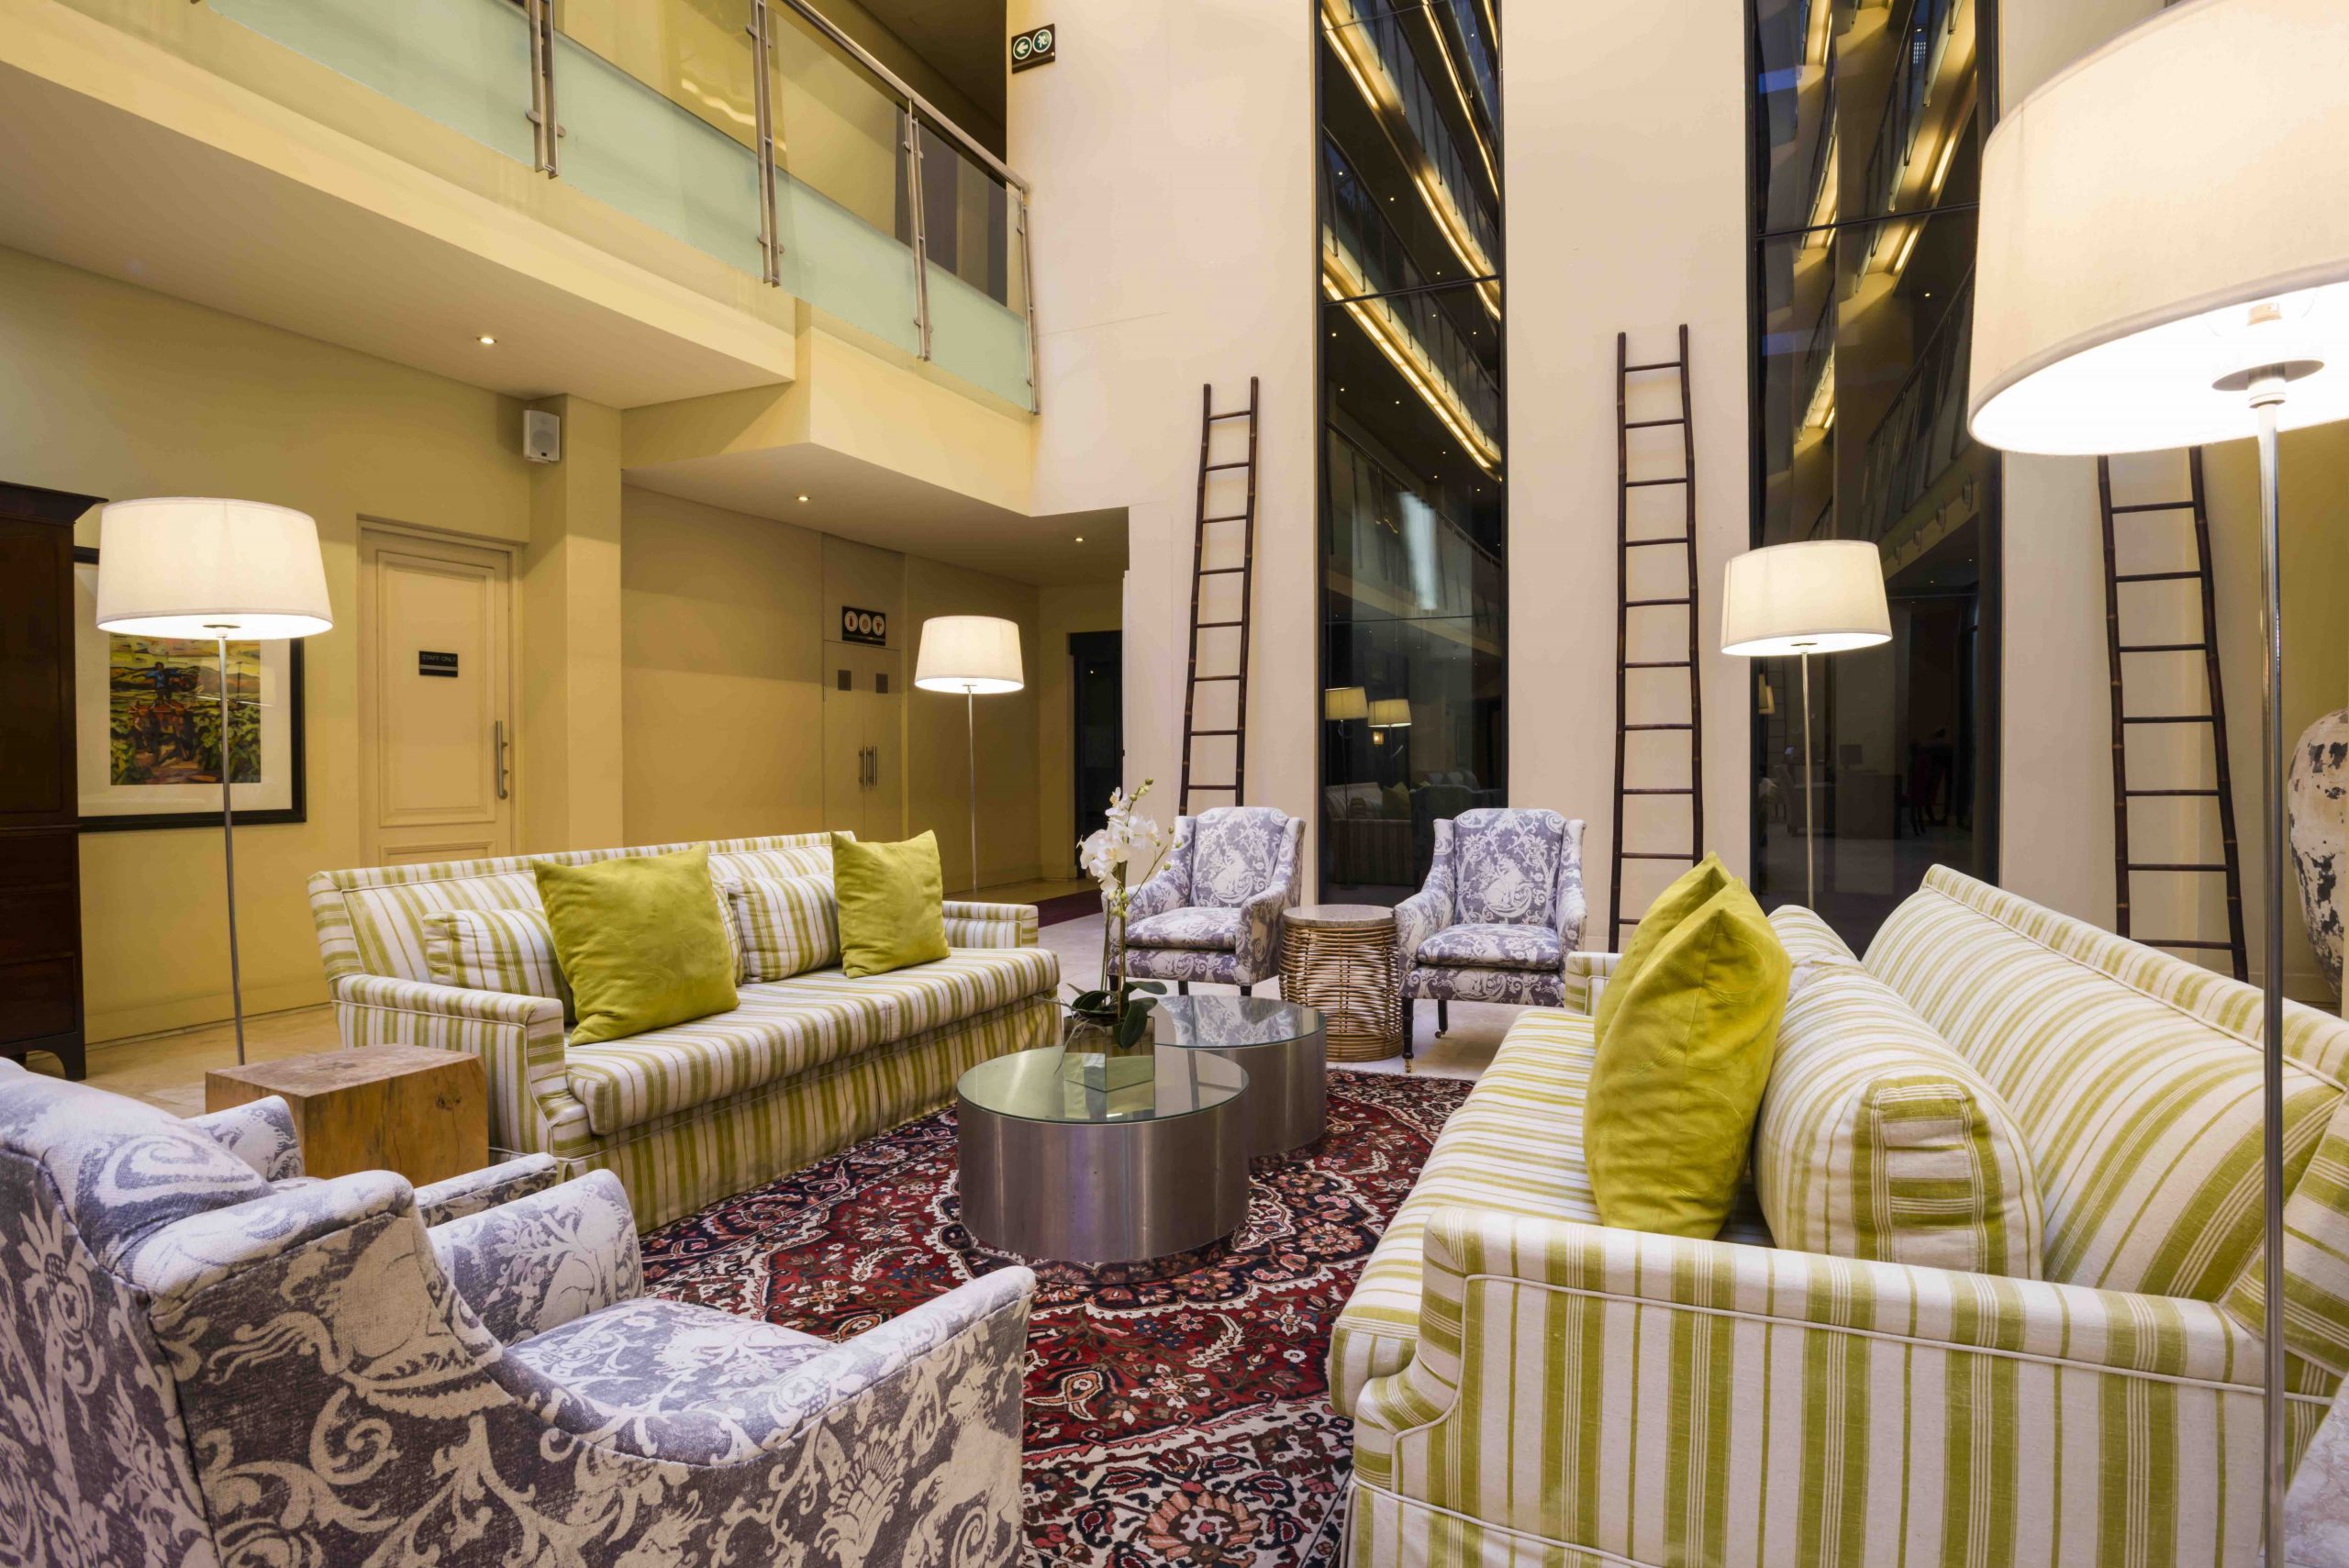 Royal Palm opens its doors to business travellers!